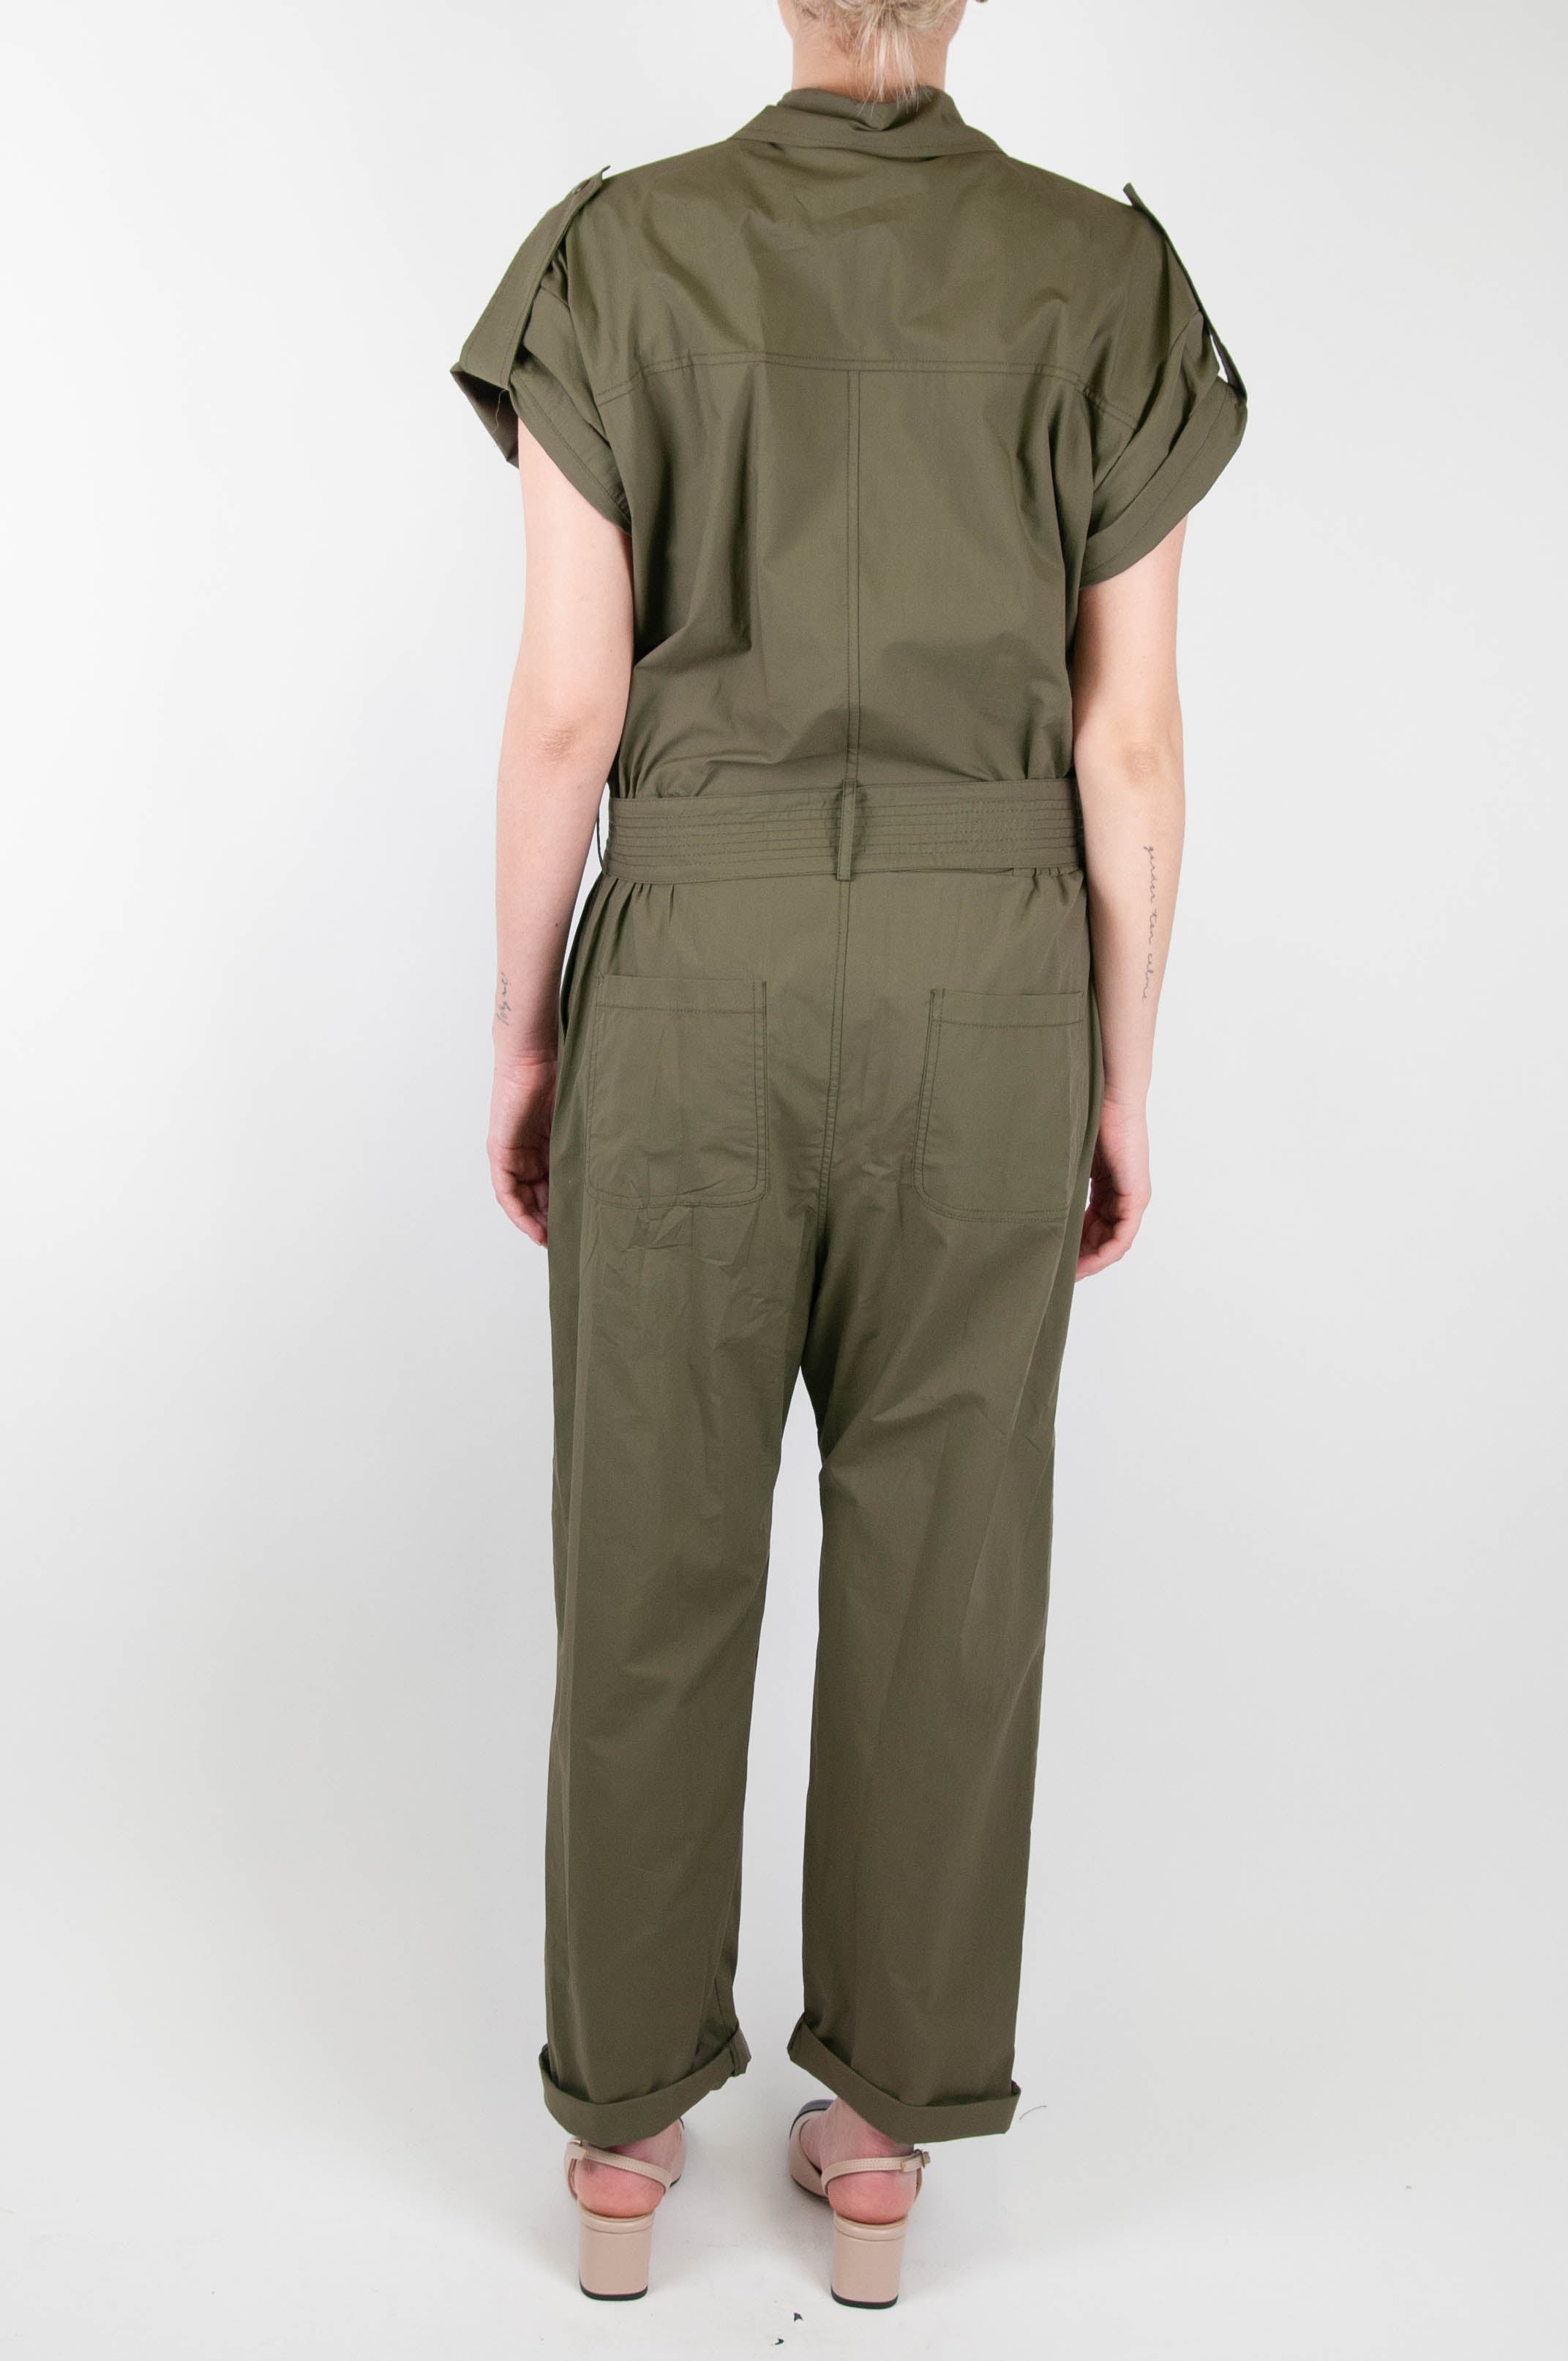 Tension in - Half sleeve jumpsuit with chest pockets and fabric belt